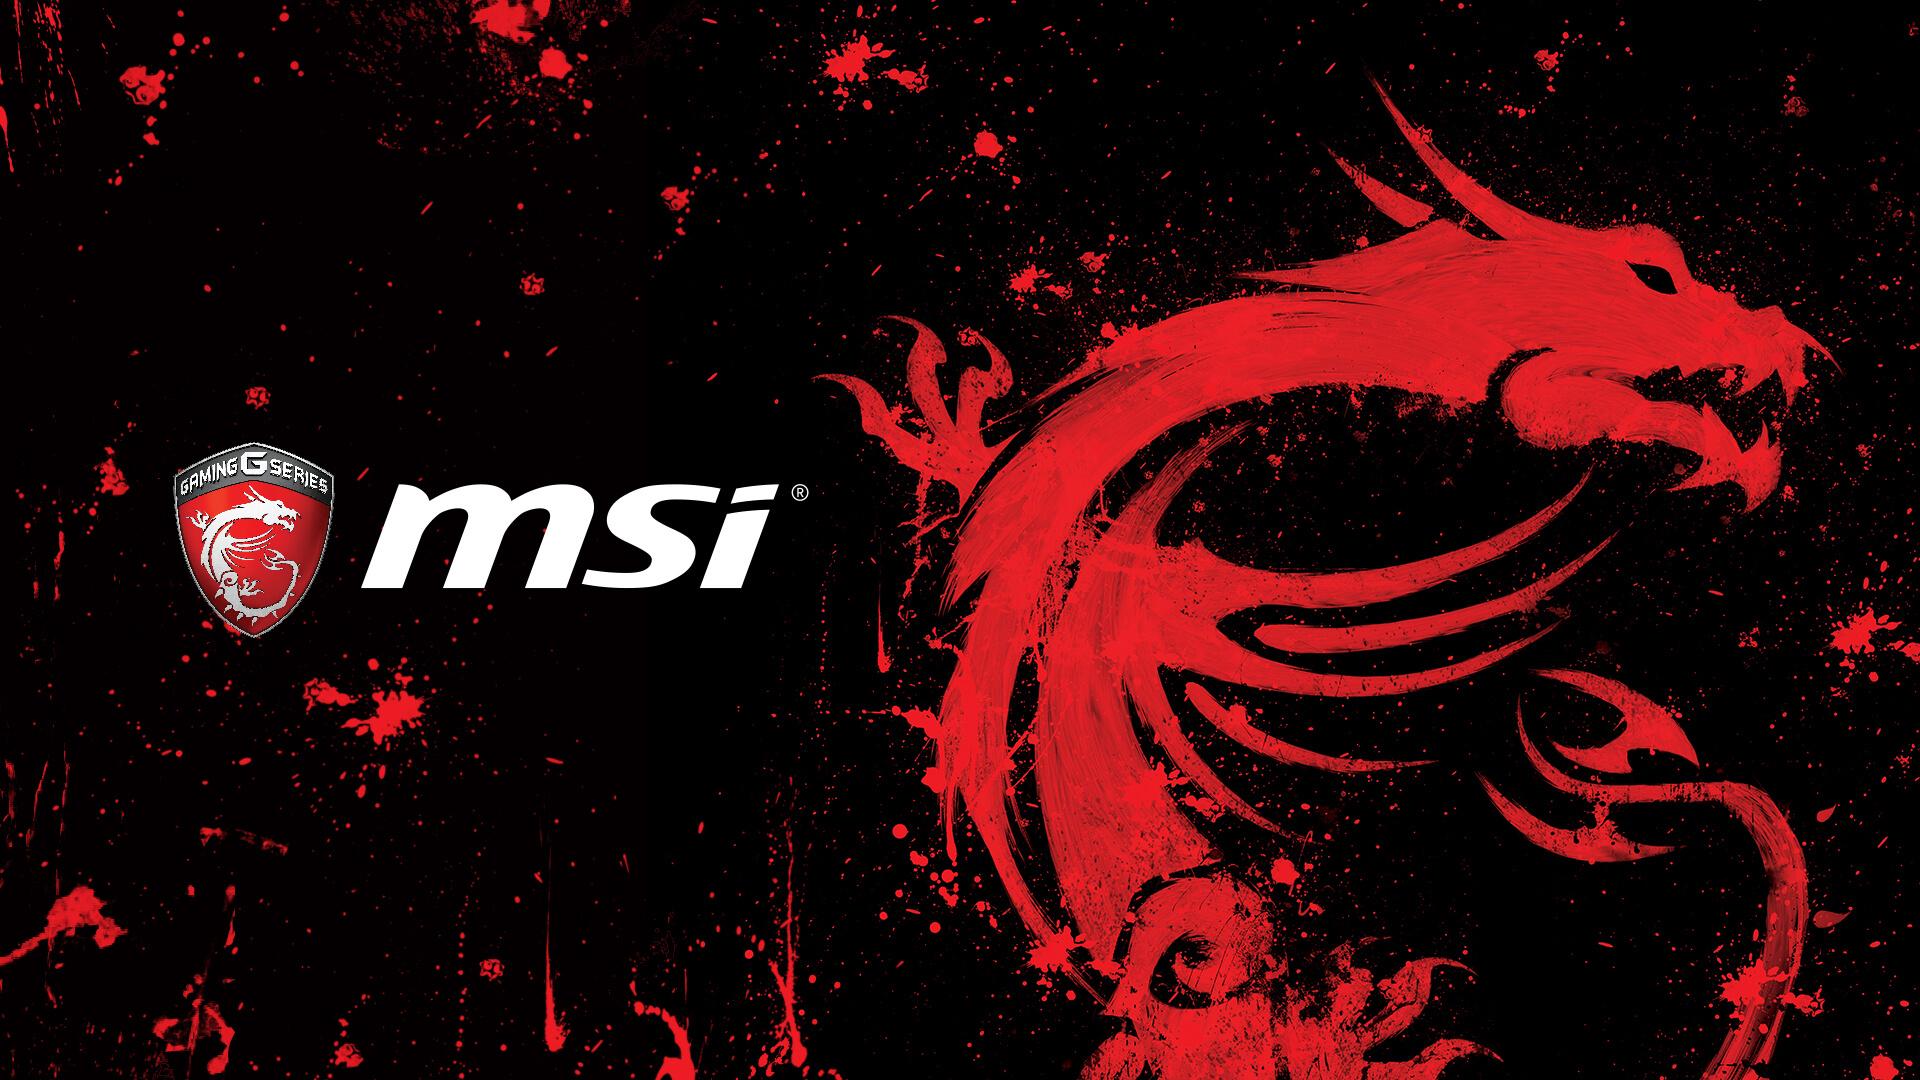 Msi Computer Wallpapers Top Free Msi Computer Backgrounds Wallpaperaccess